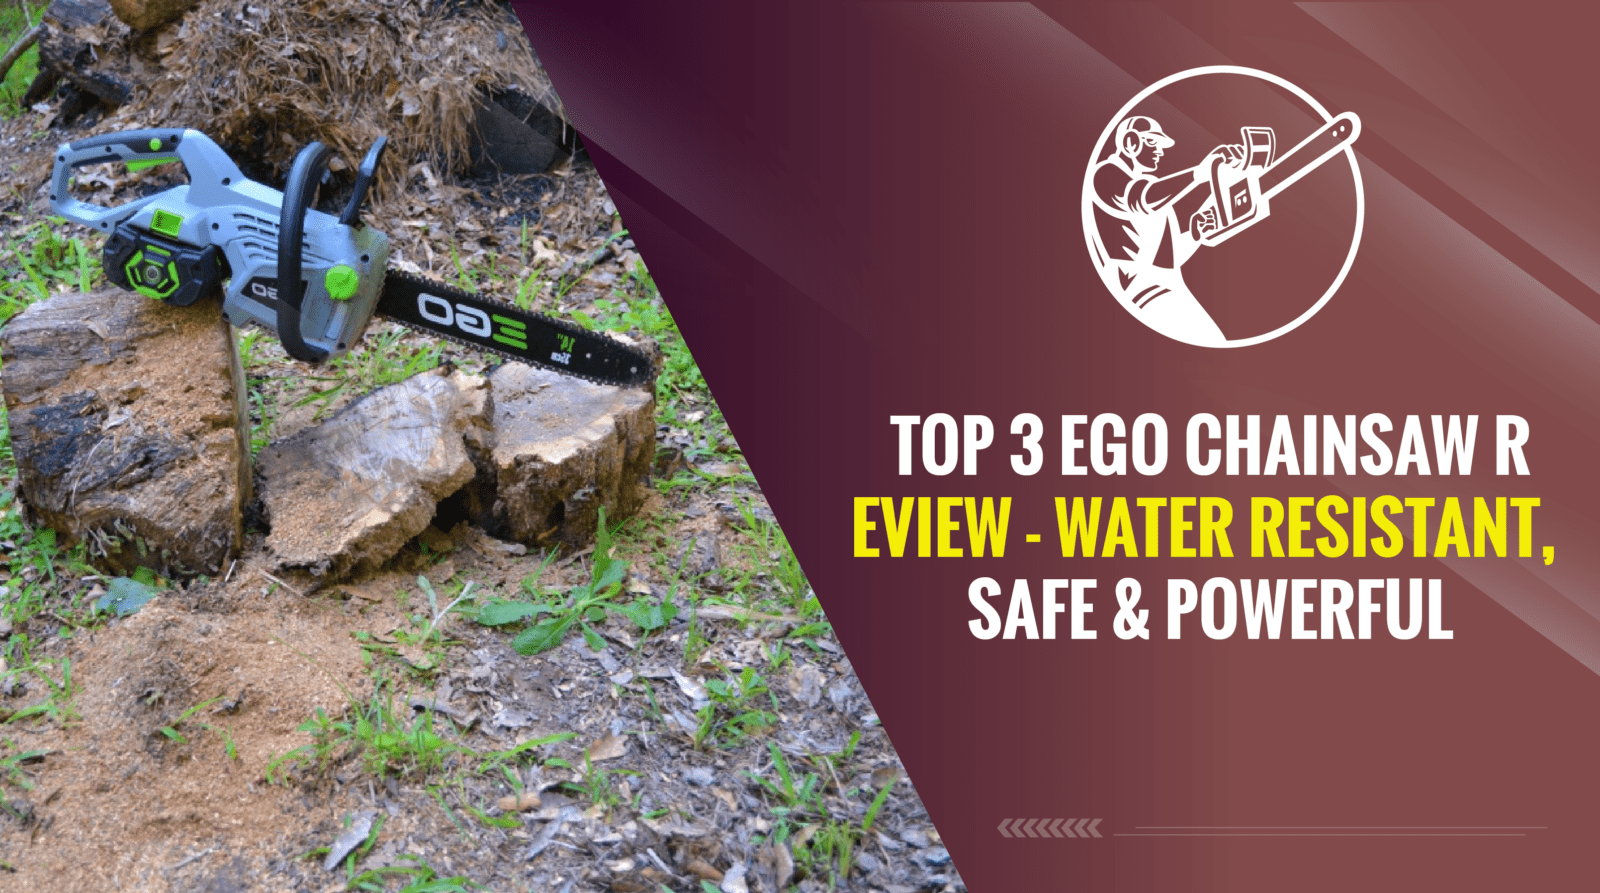 Top 3 Ego Chainsaw Review – Water Resistant, Safe & Powerful